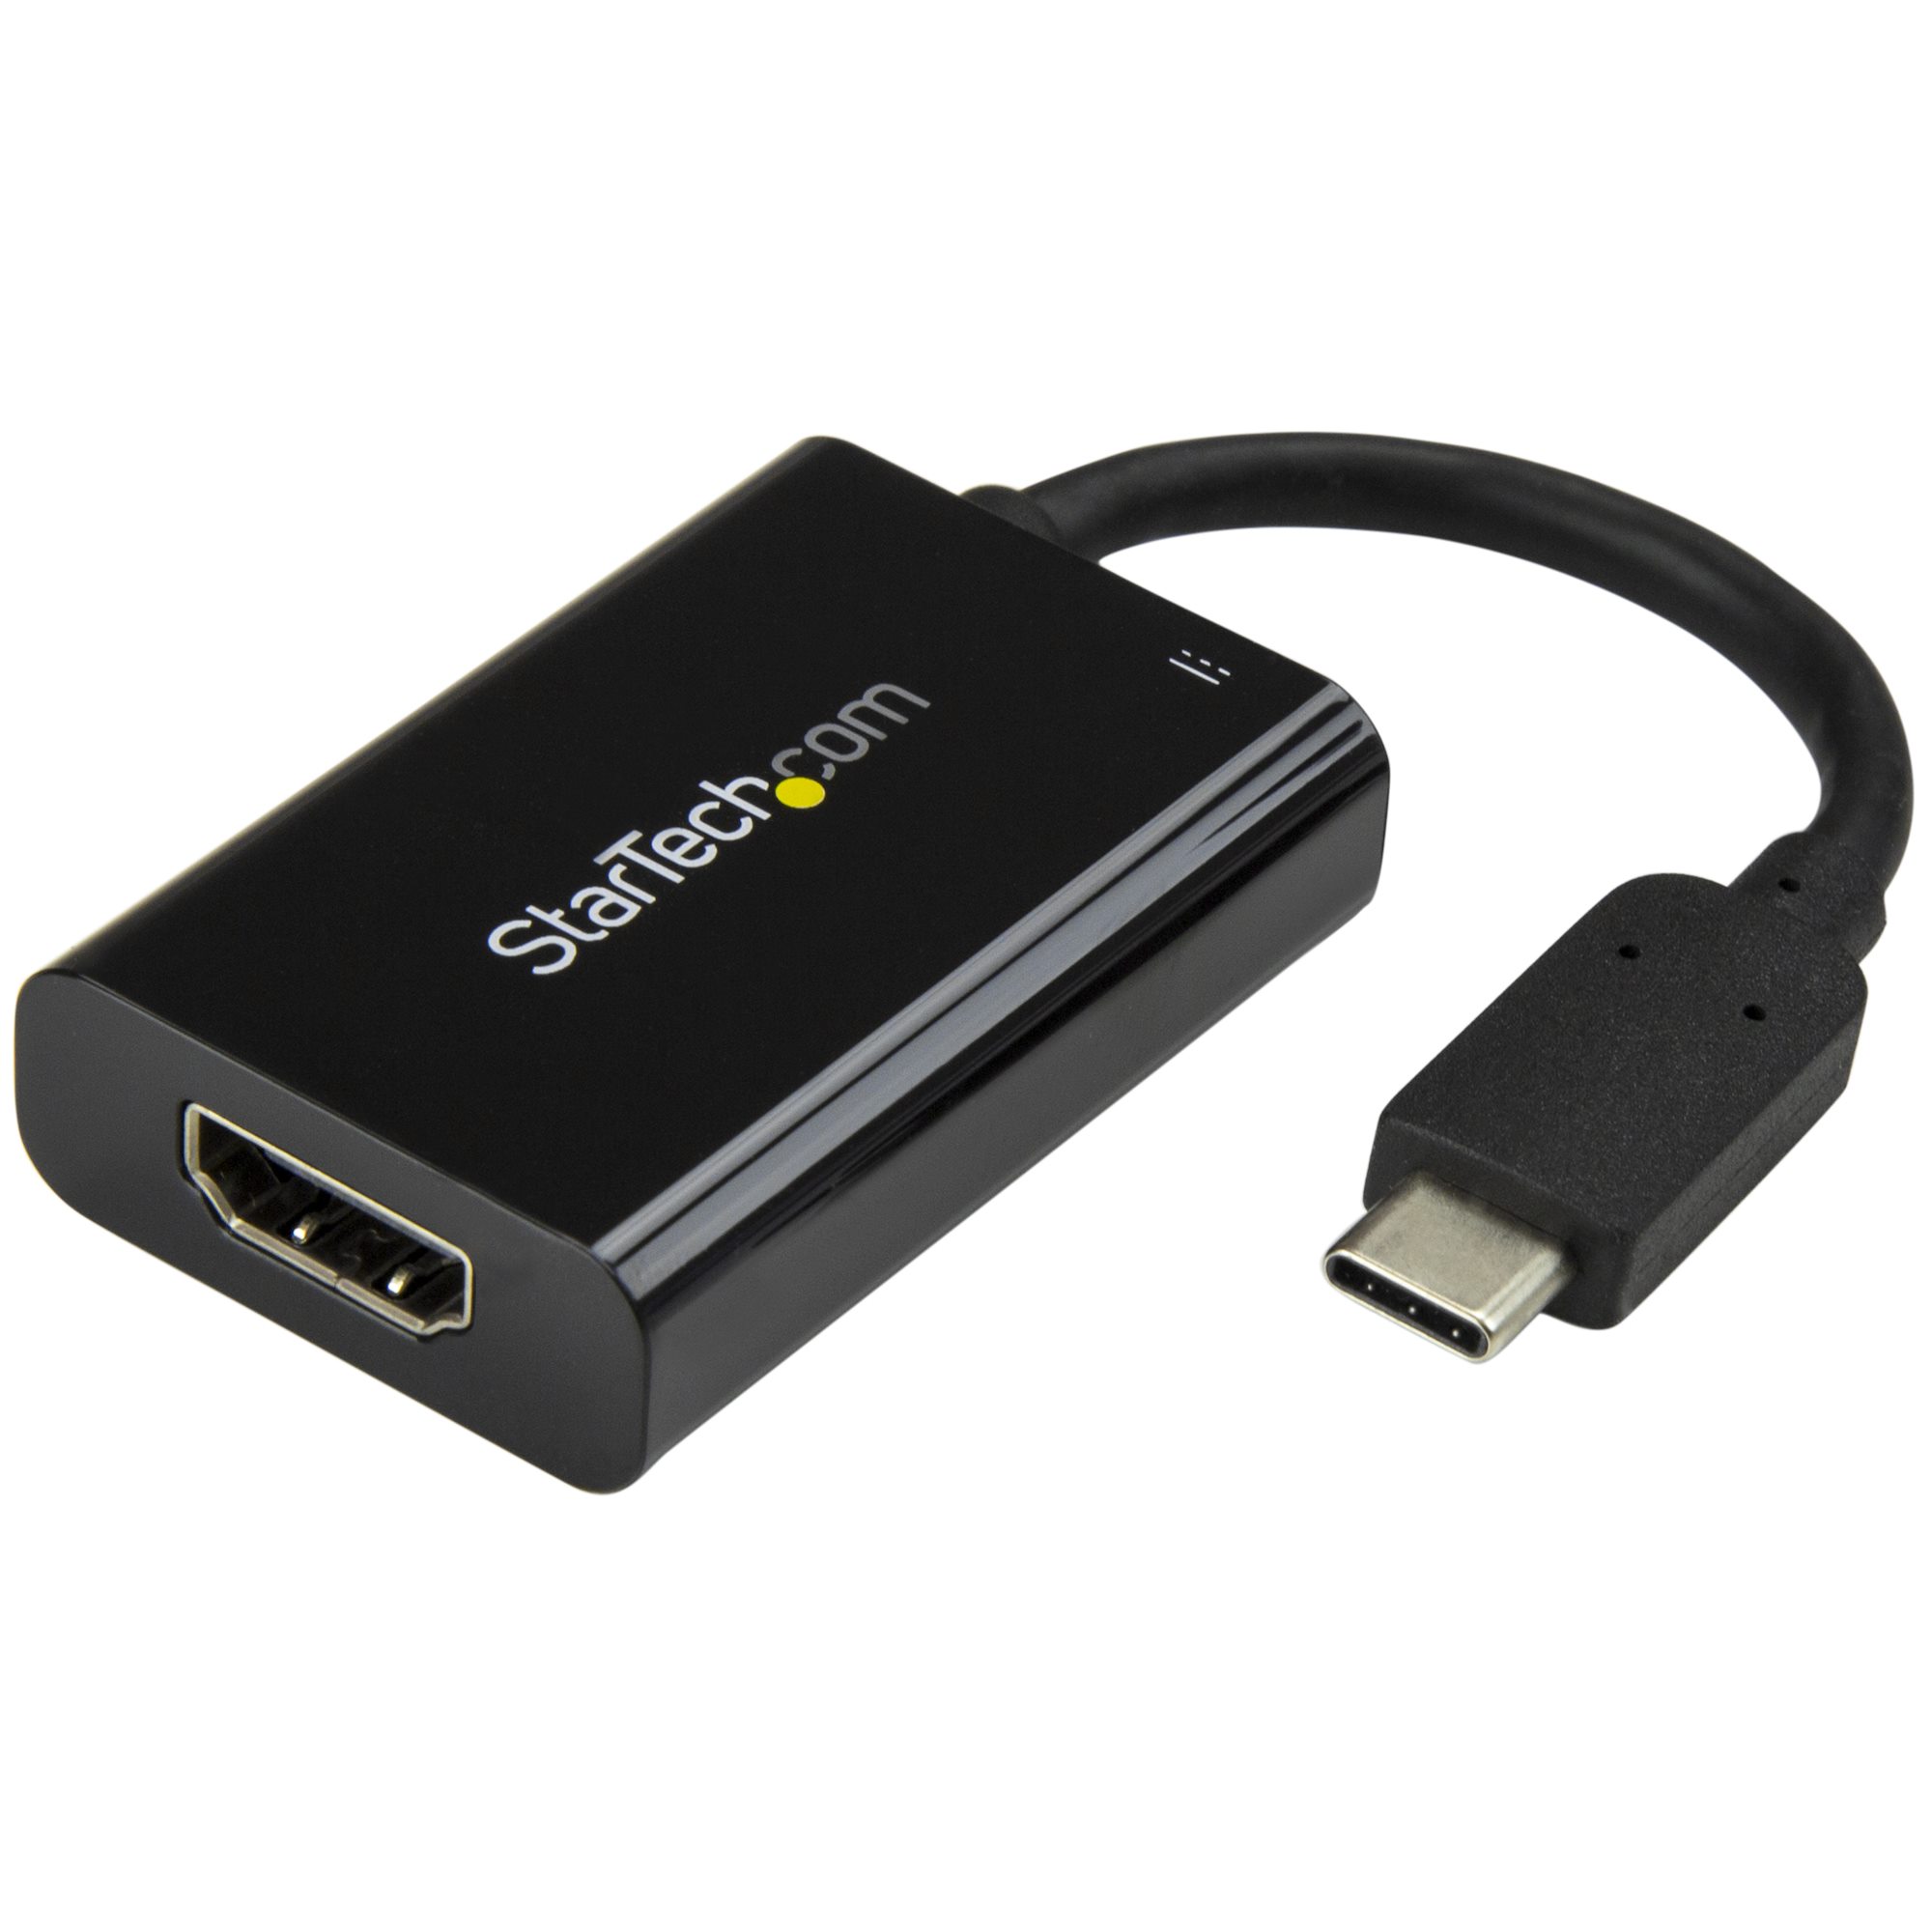 Cable Usb-C To HDMI Adapter Video Universal 2m Black 